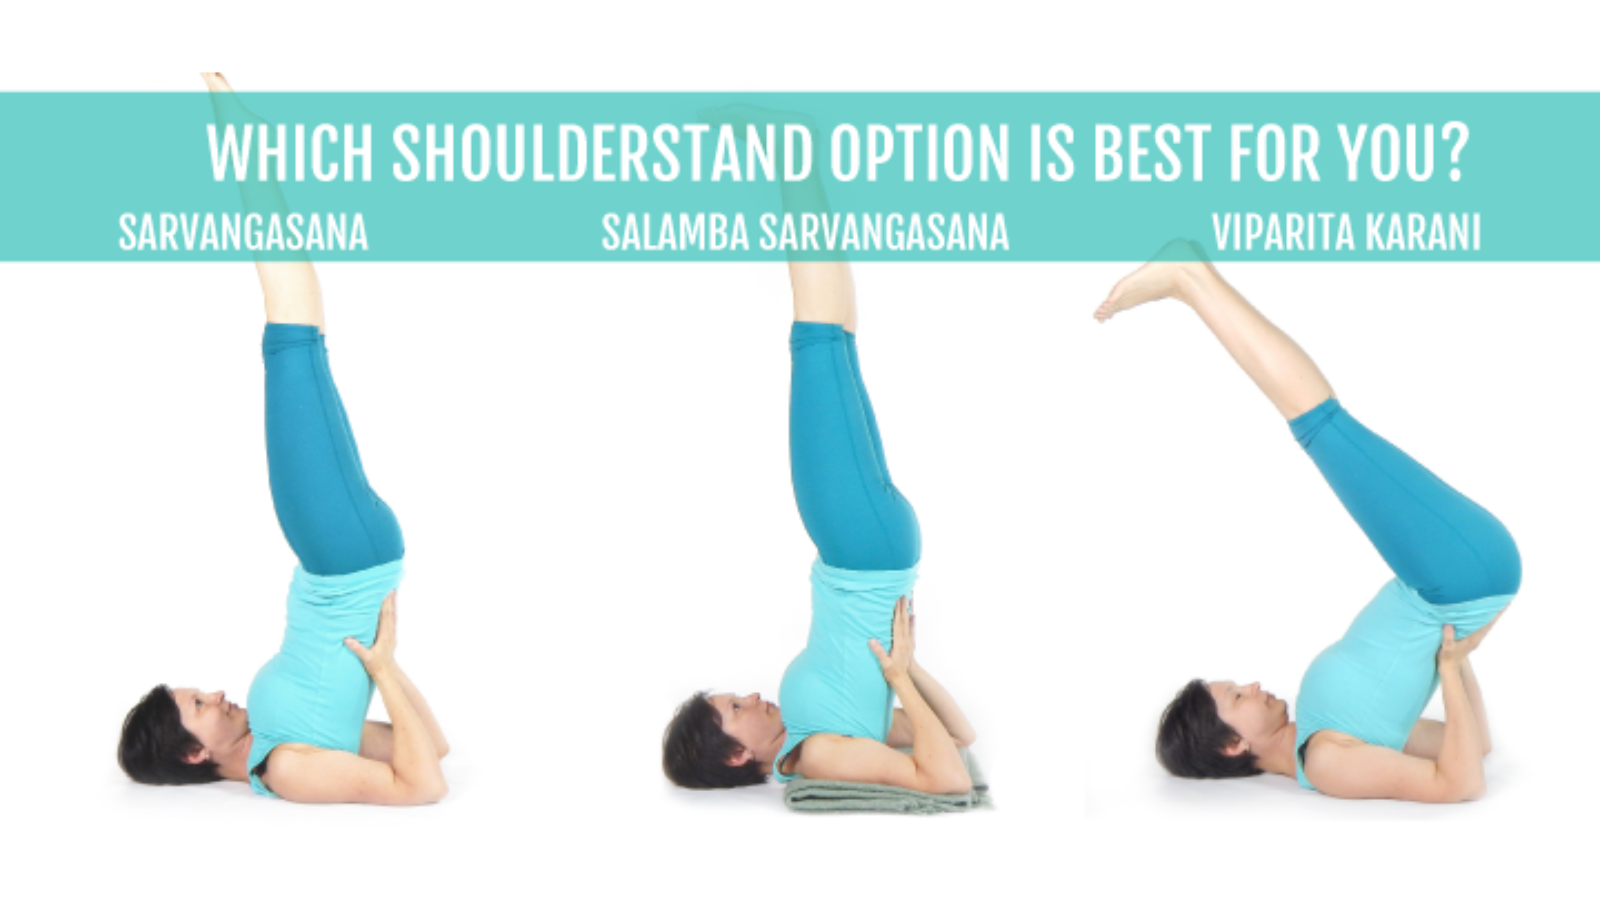 Image depicts some of the different ways to practice Shoulderstand. 